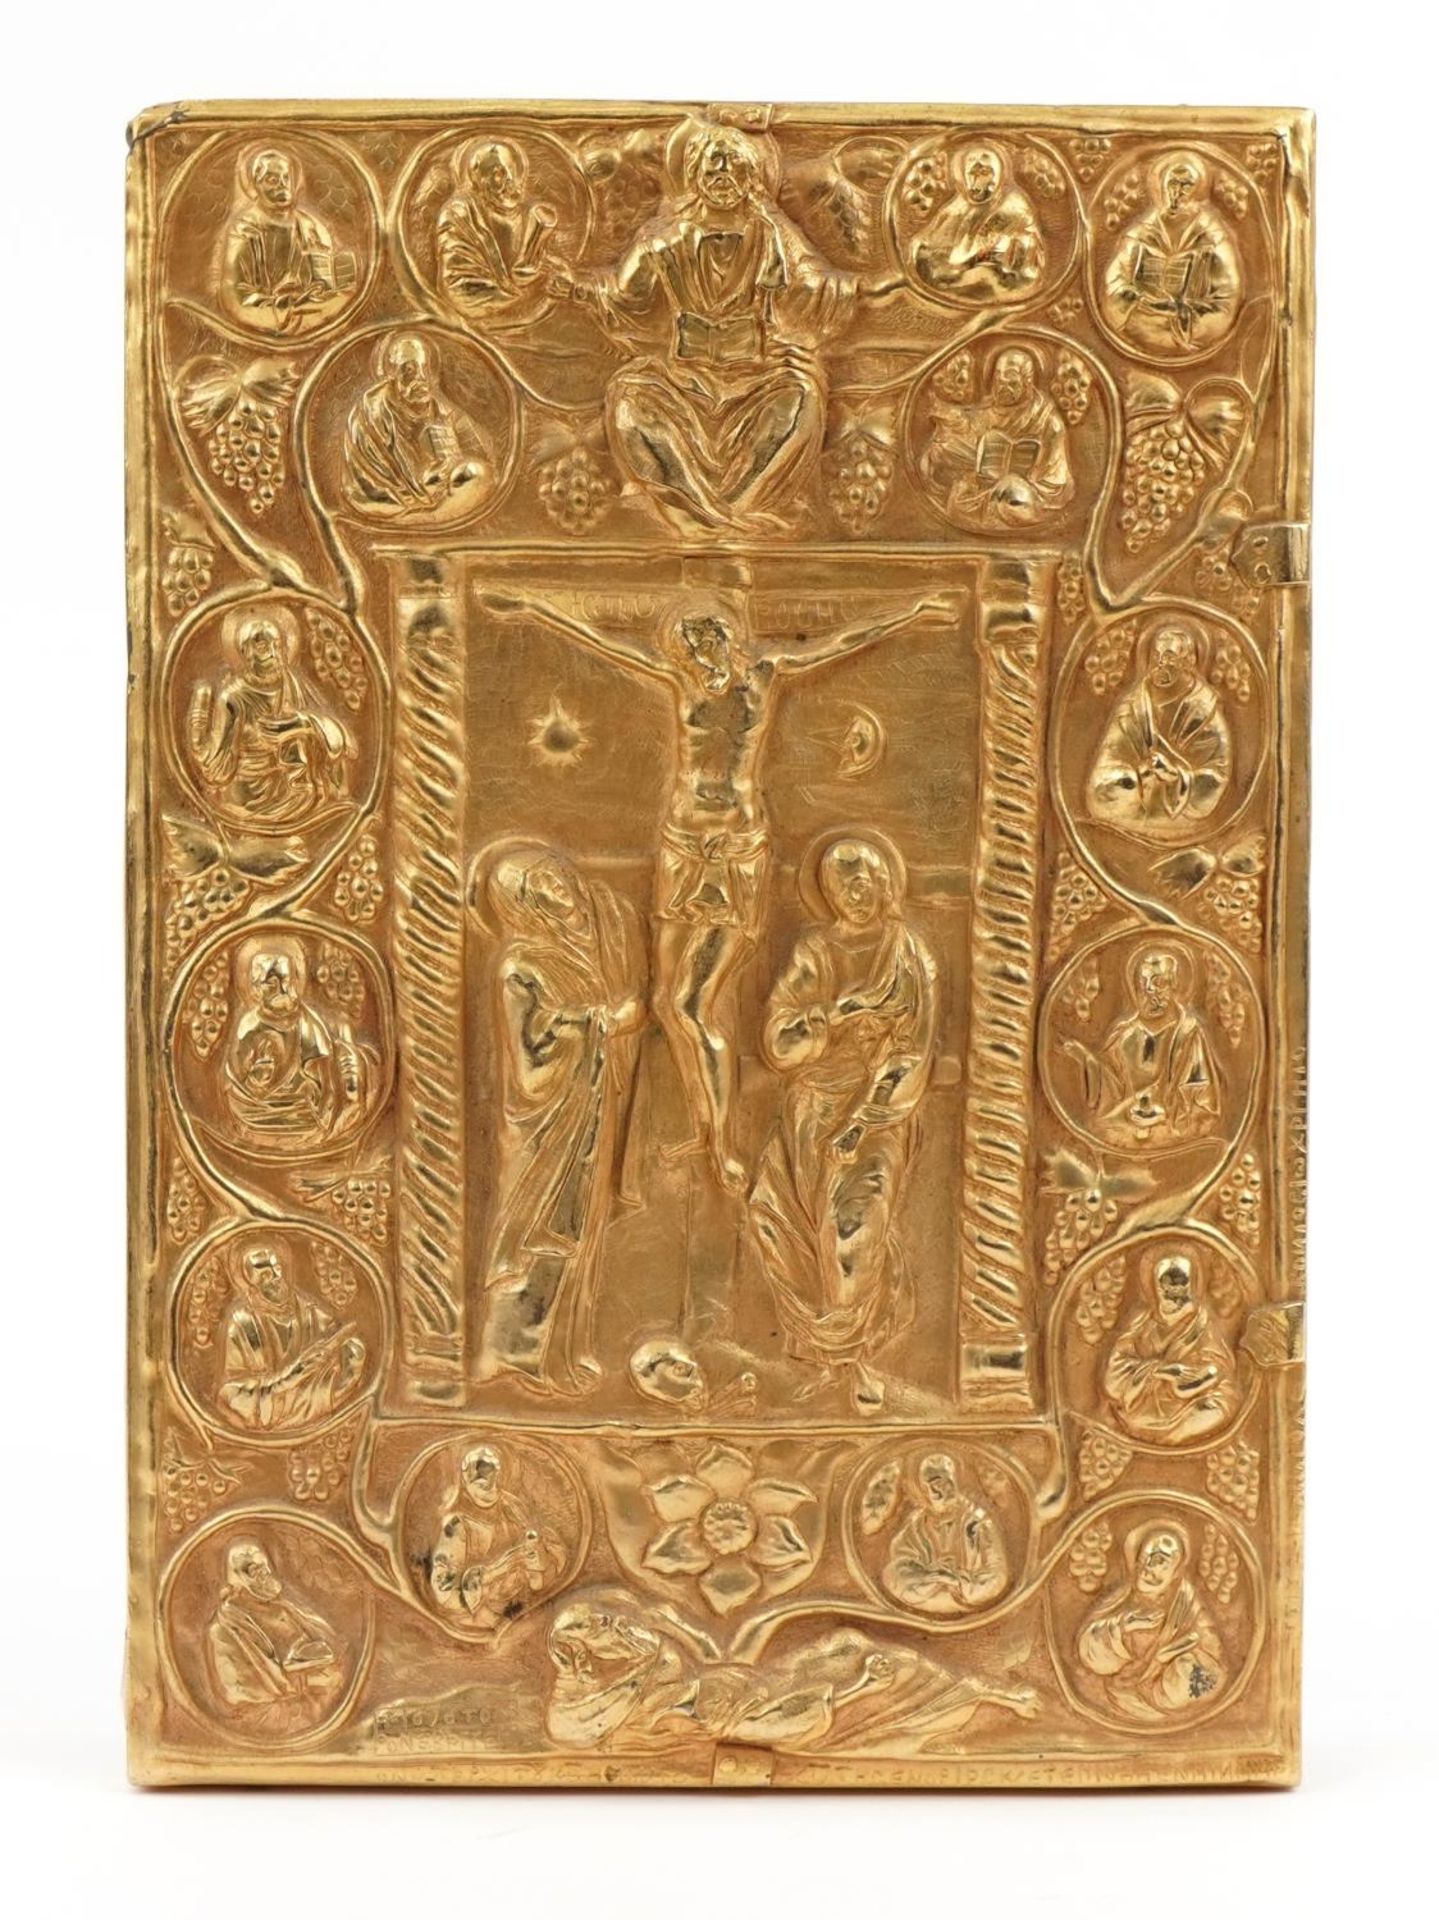 Rectangular gilt metal hanging icon engraved with script, possibly Russian, 28.5cm x 20cm - Image 2 of 8